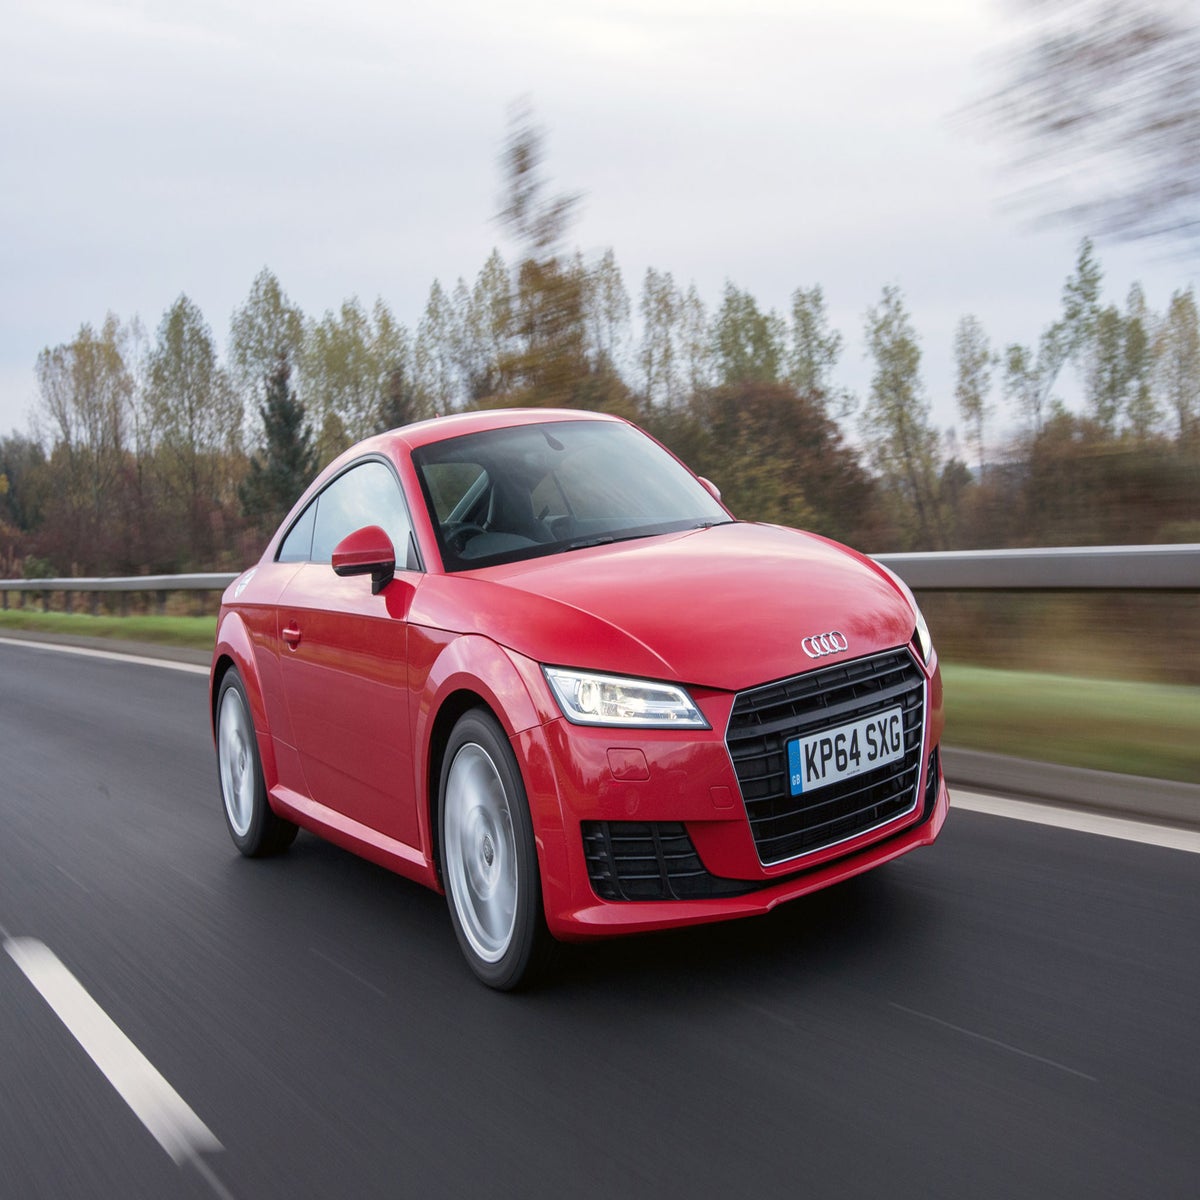 First-generation Audi TT, Buyer's Guide, Articles